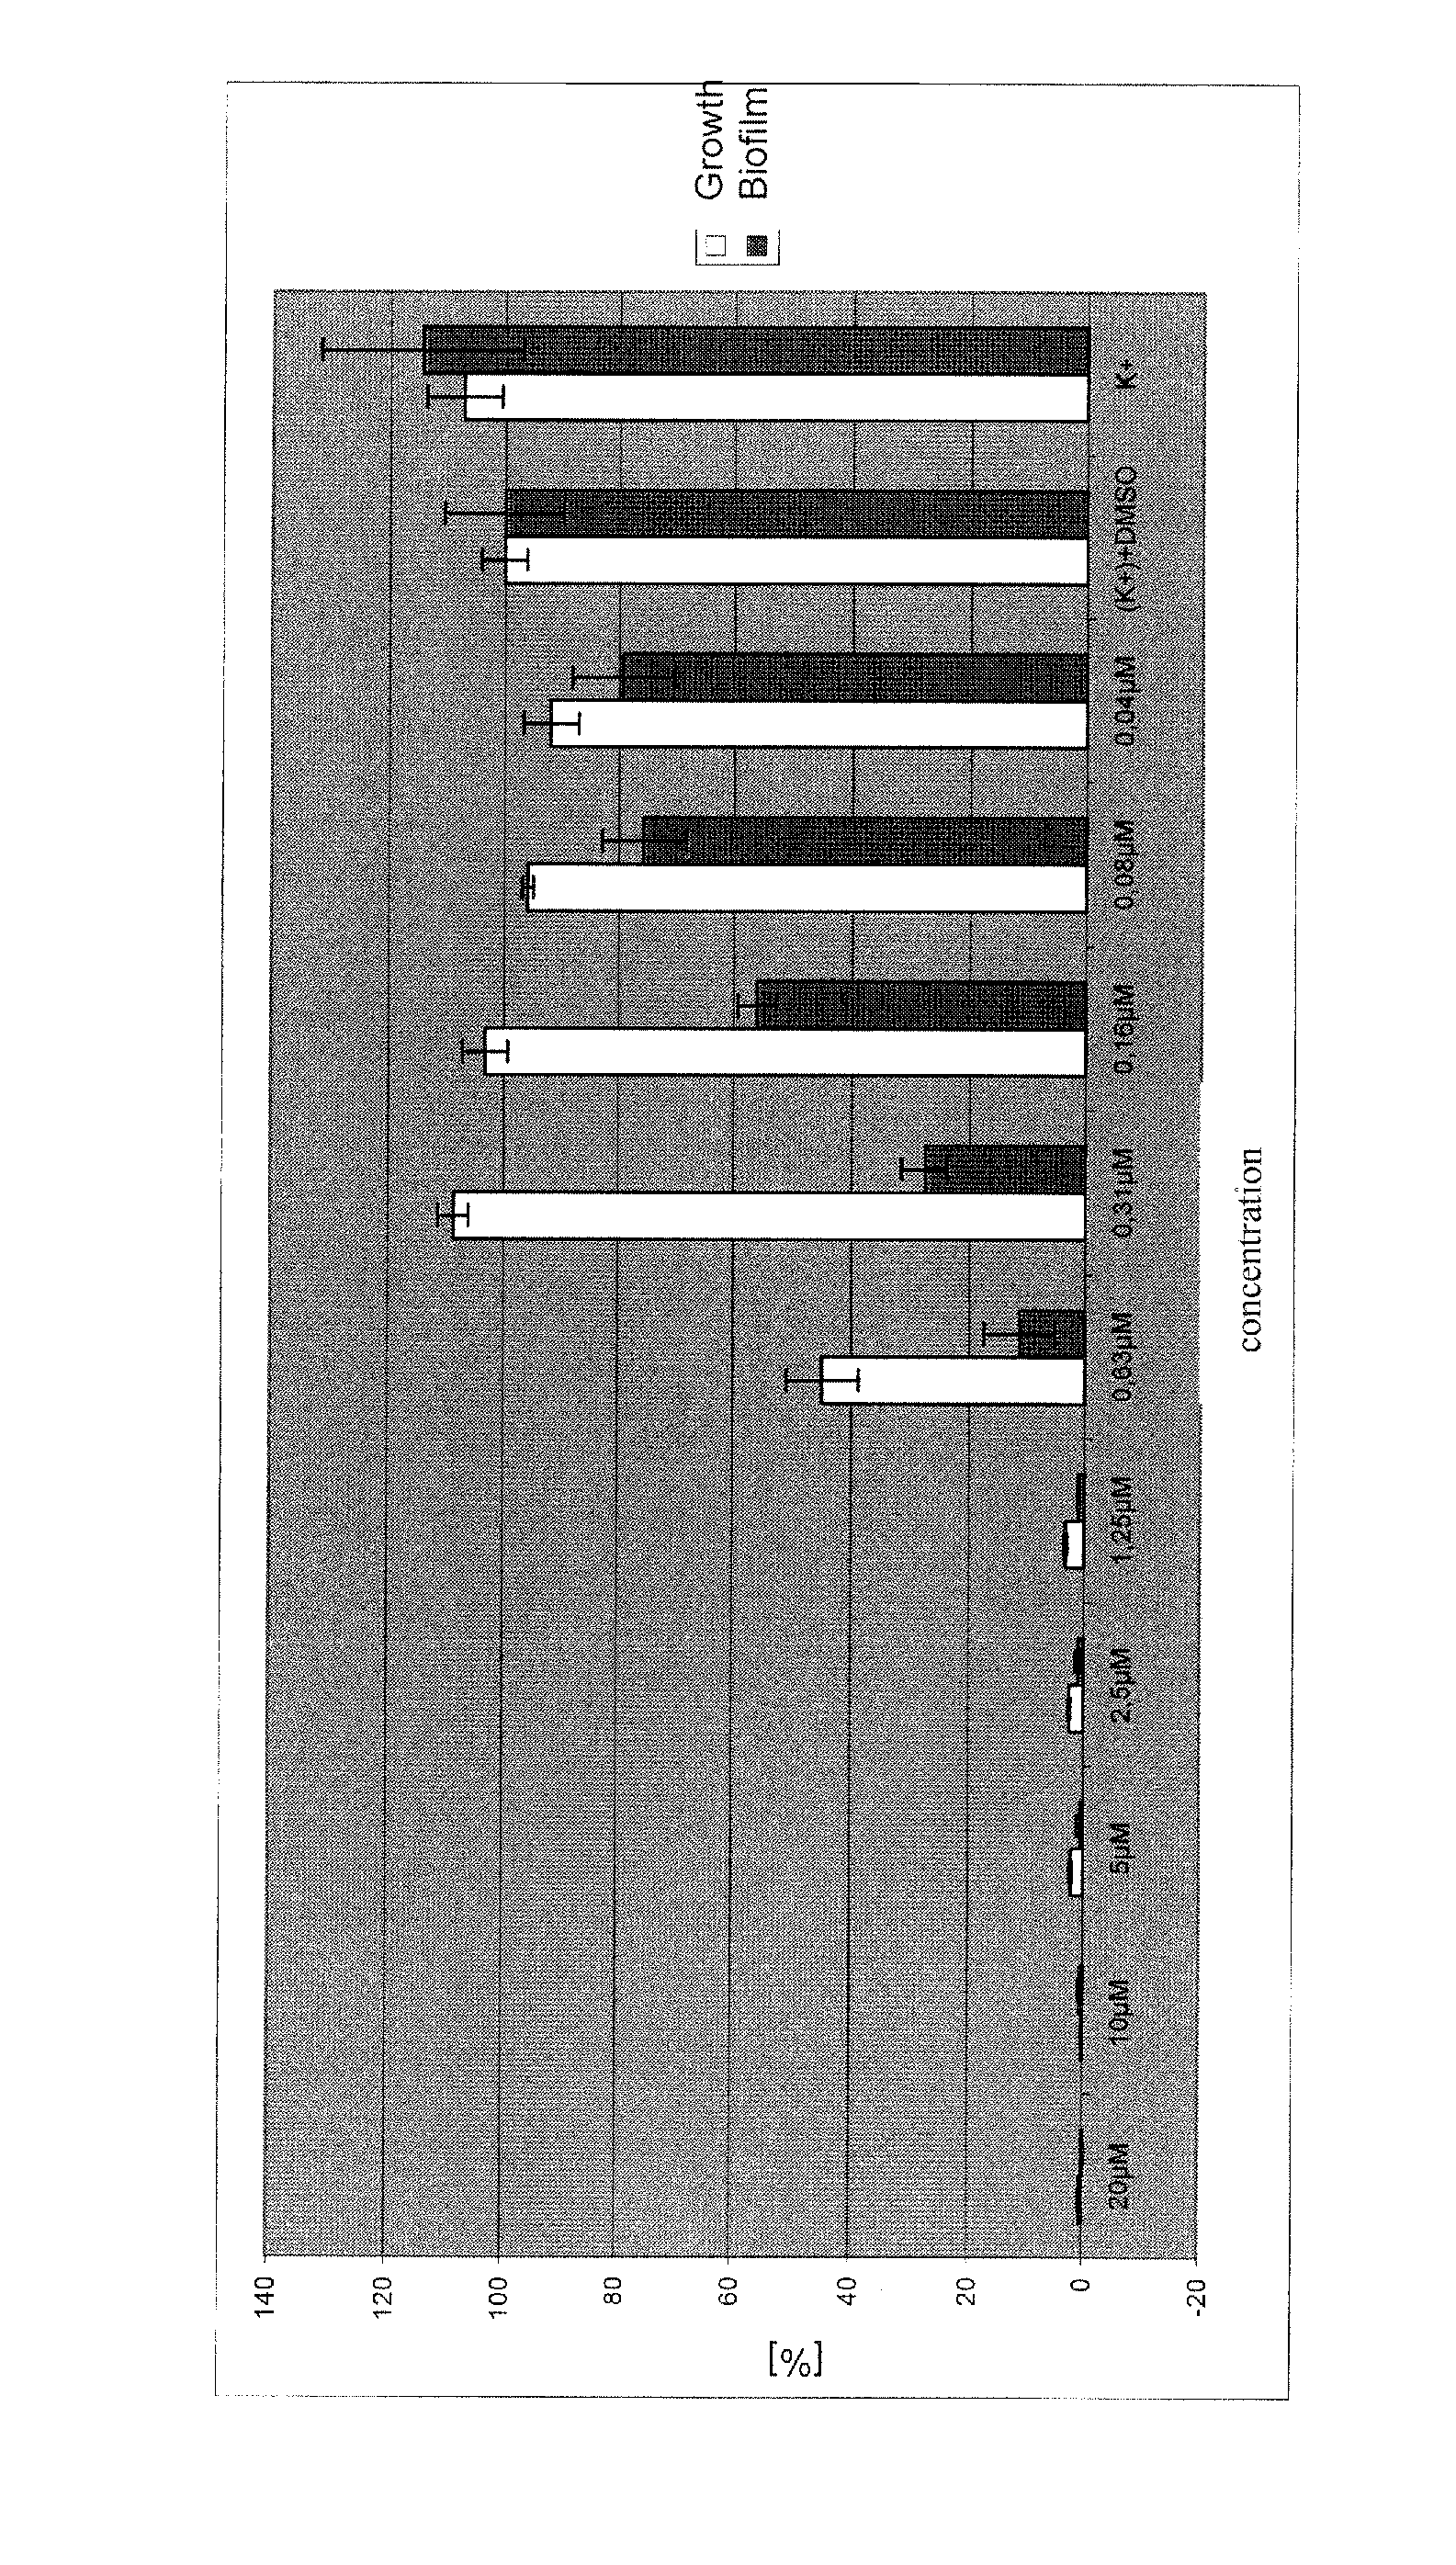 Biofilm-inhibiting effect and anti-infective activity of N,C-linked aryl isoquinolines and the use thereof